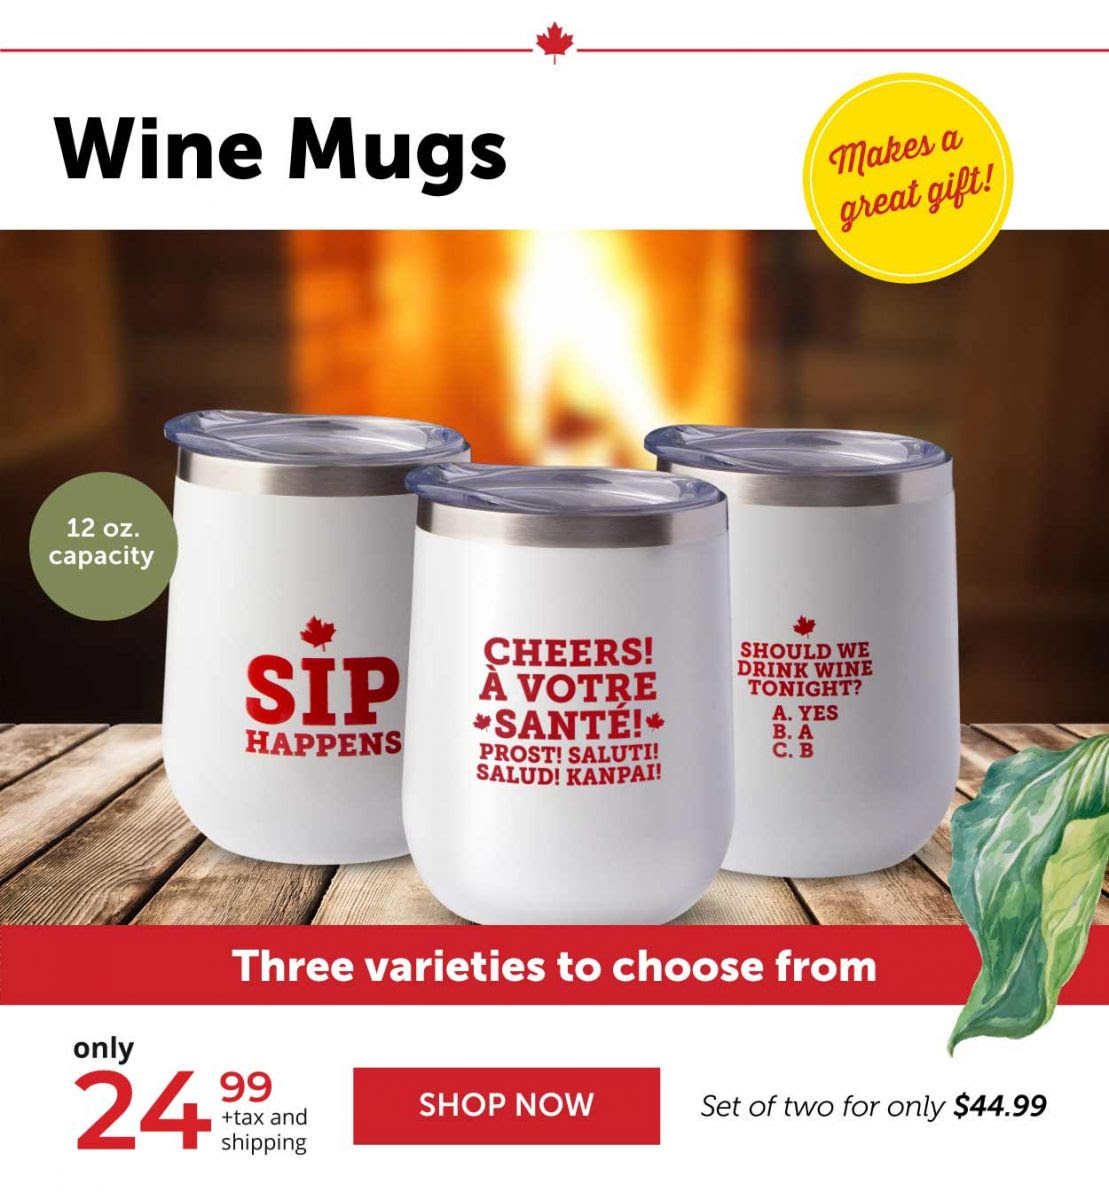 Wine Mugs $24.99 Set of two for only $44.99  